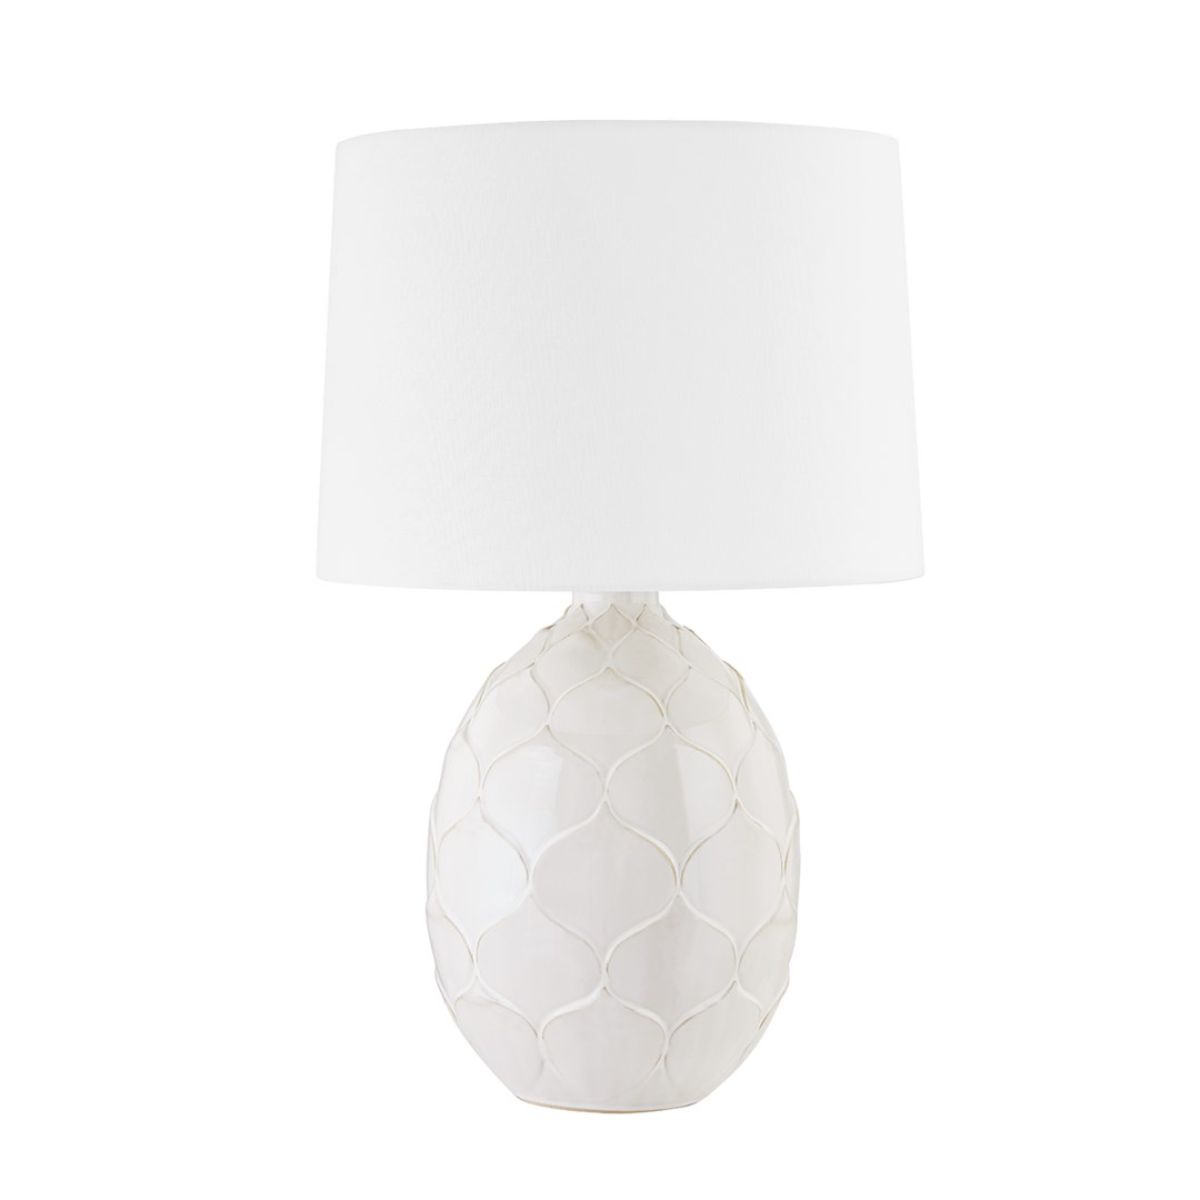 Gardena Table Lamp Ceramic Reactive White with Patina Brass Accents